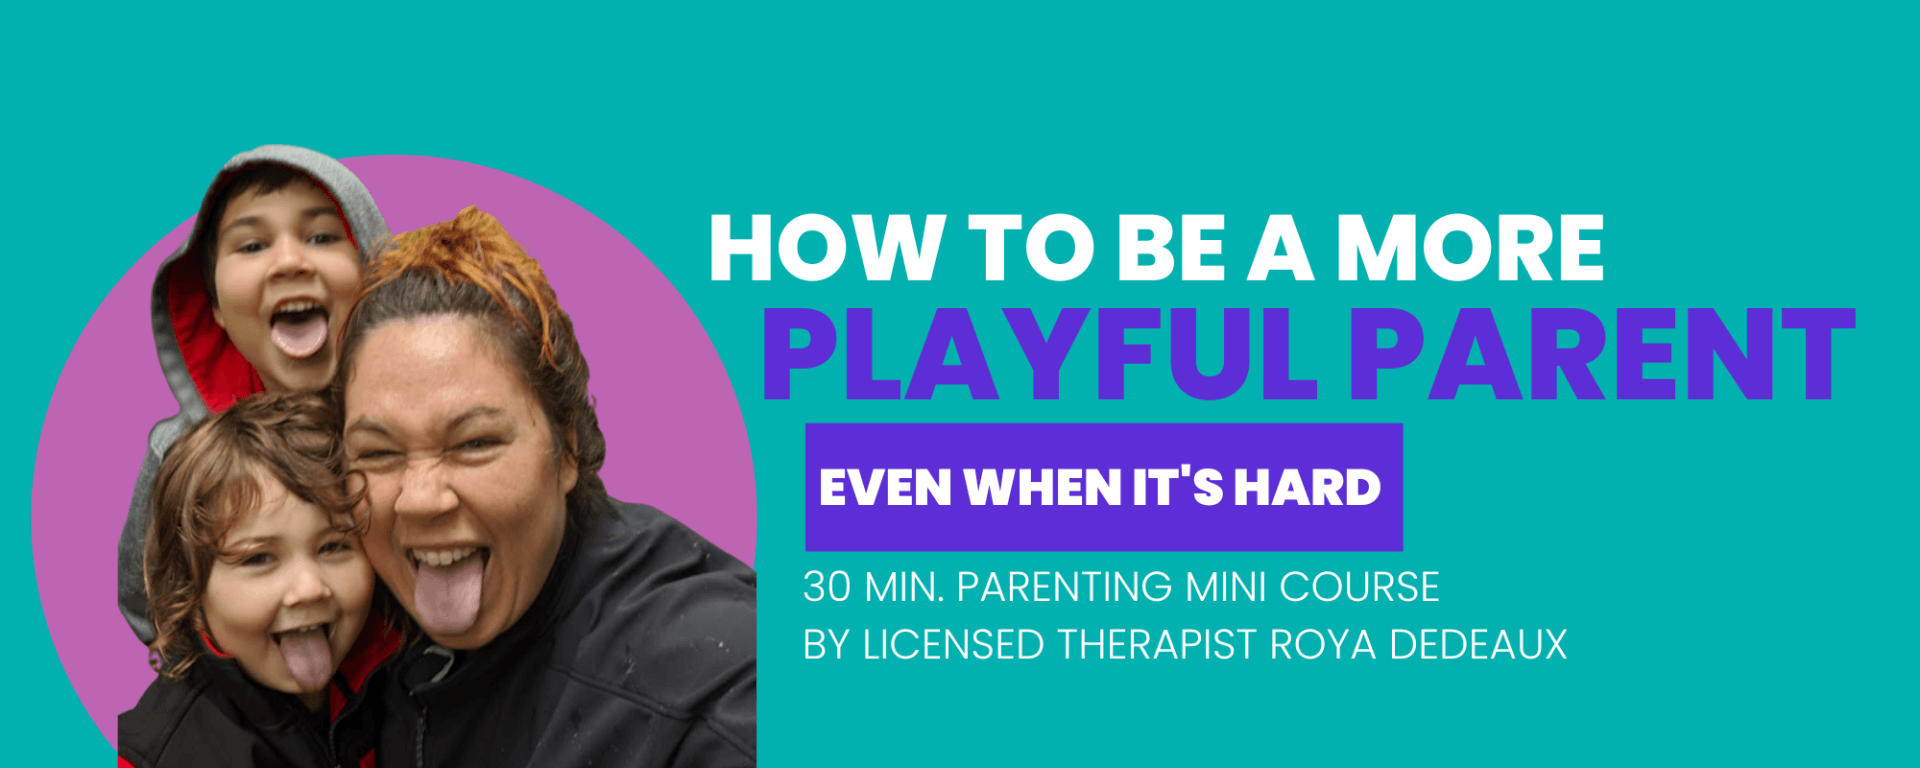 How to be a more playful parent even when it's hard